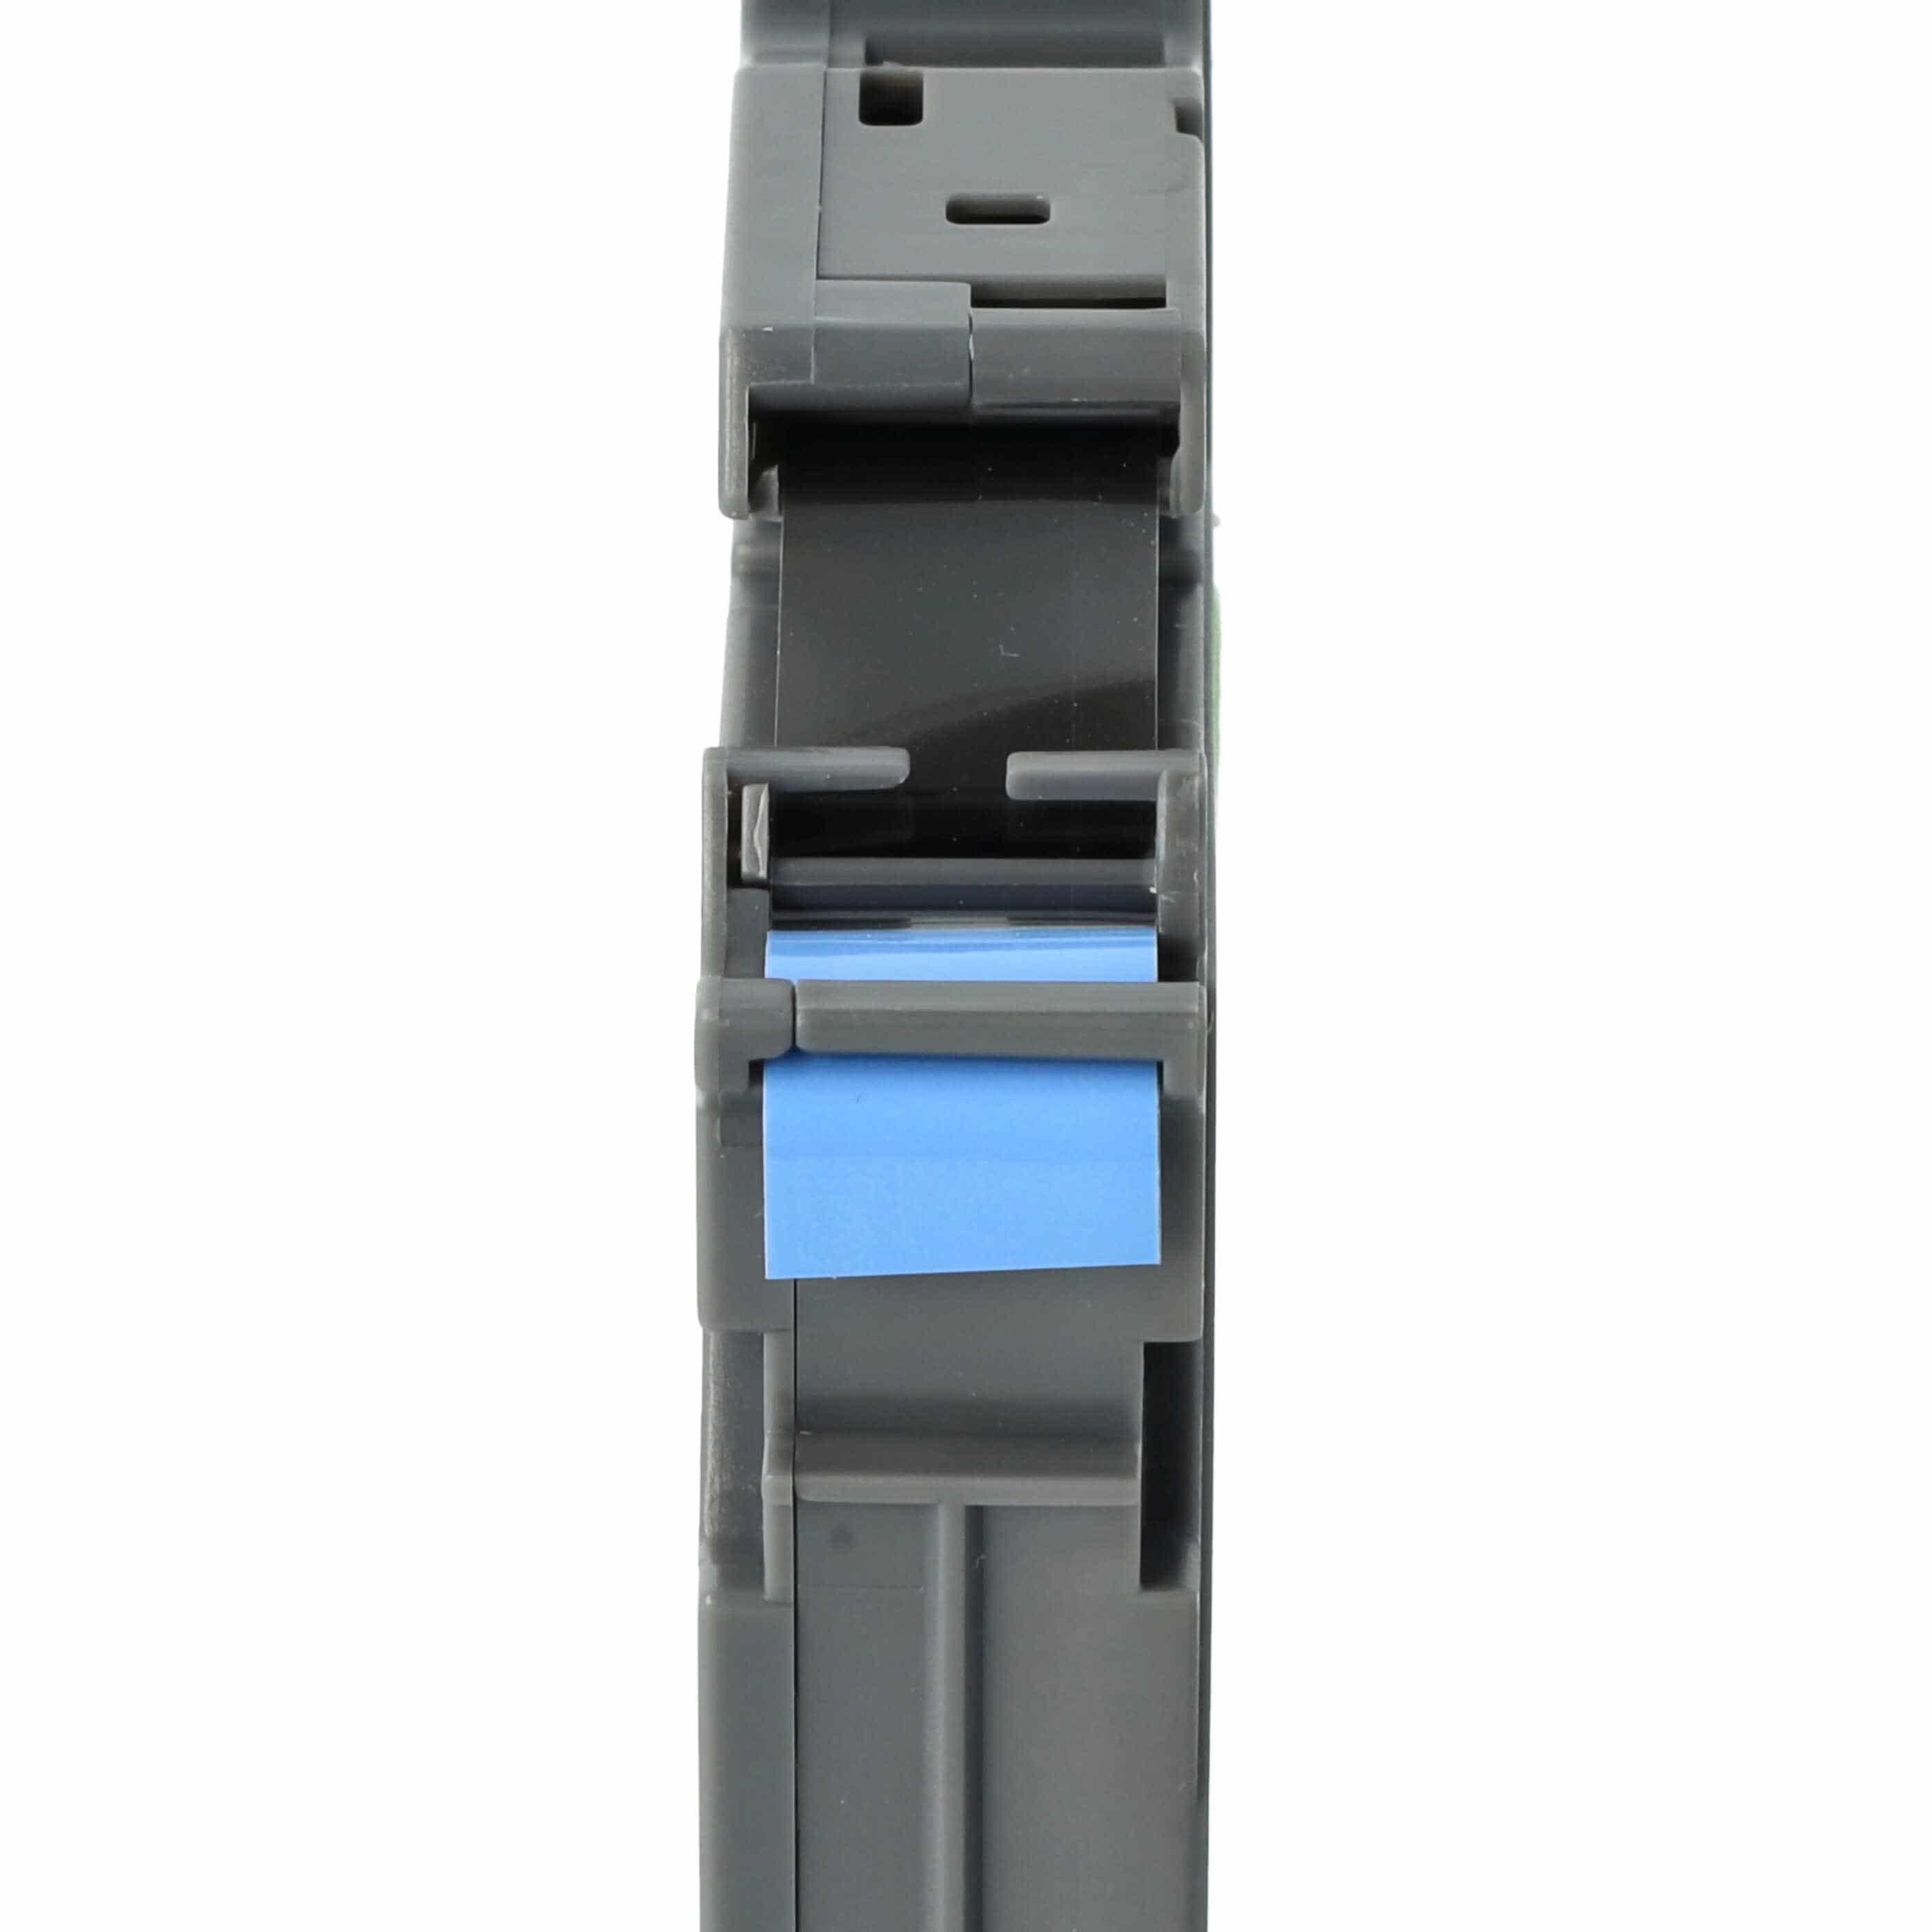 Label Tape as Replacement for Brother TZFX531, TZeFX531, TZ-FX531, TZE-FX531 - 12 mm Black to Blue, Flexible